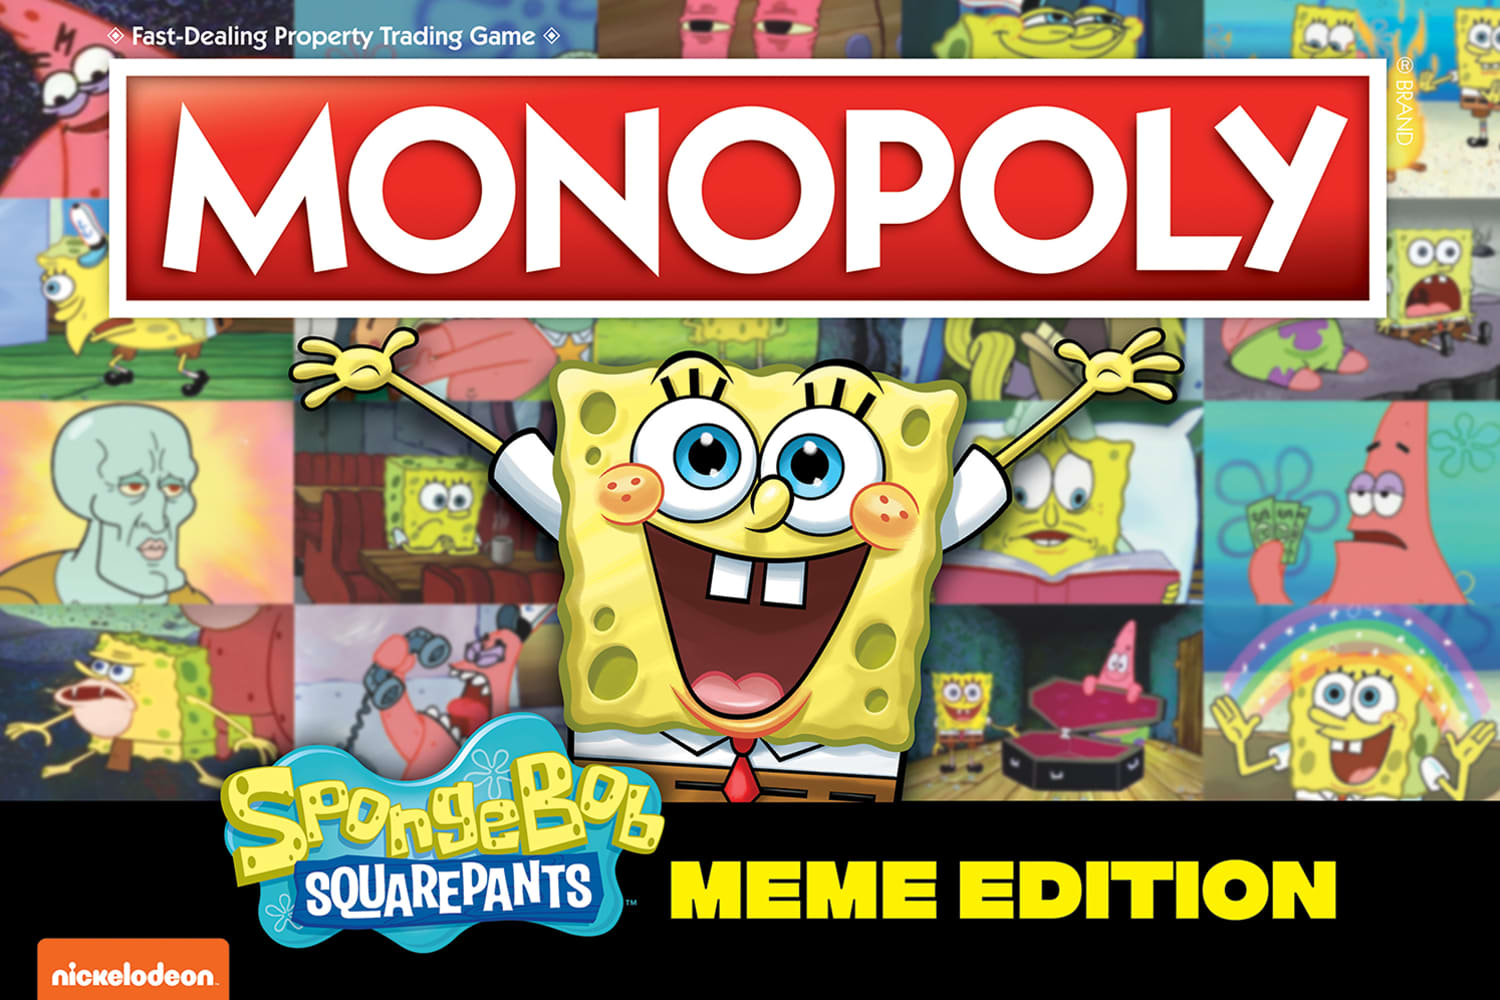 The Op Releases Spongebob Squarepants Meme Edition Of Monopoly Apartment Therapy